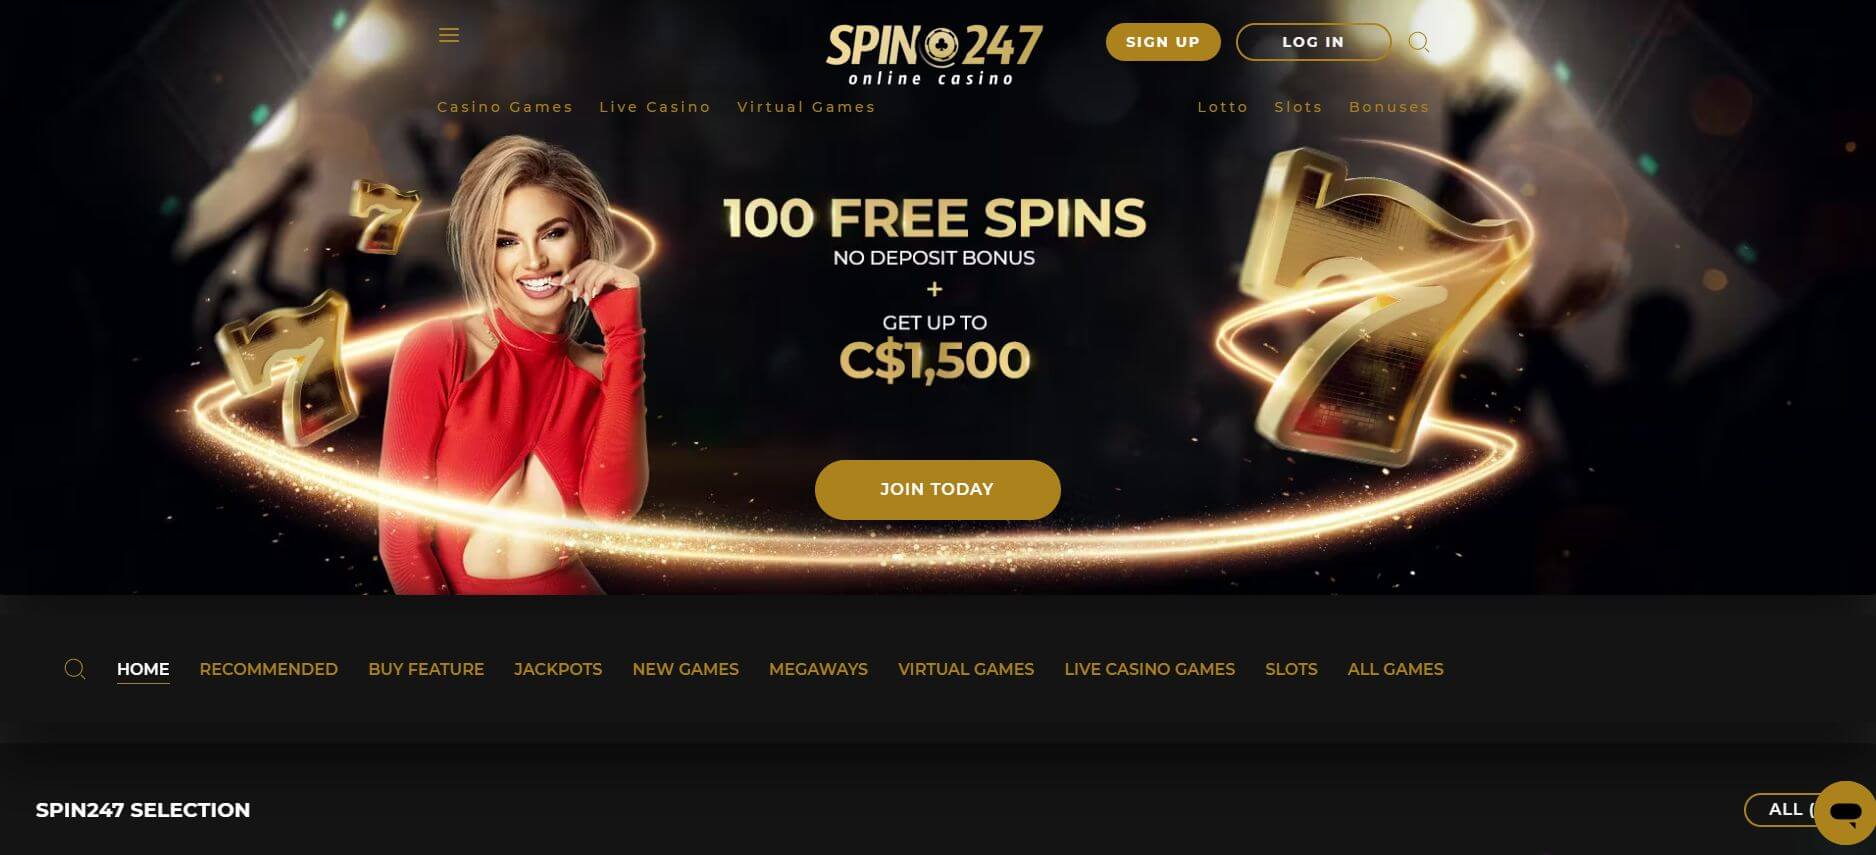 Spin247 Review